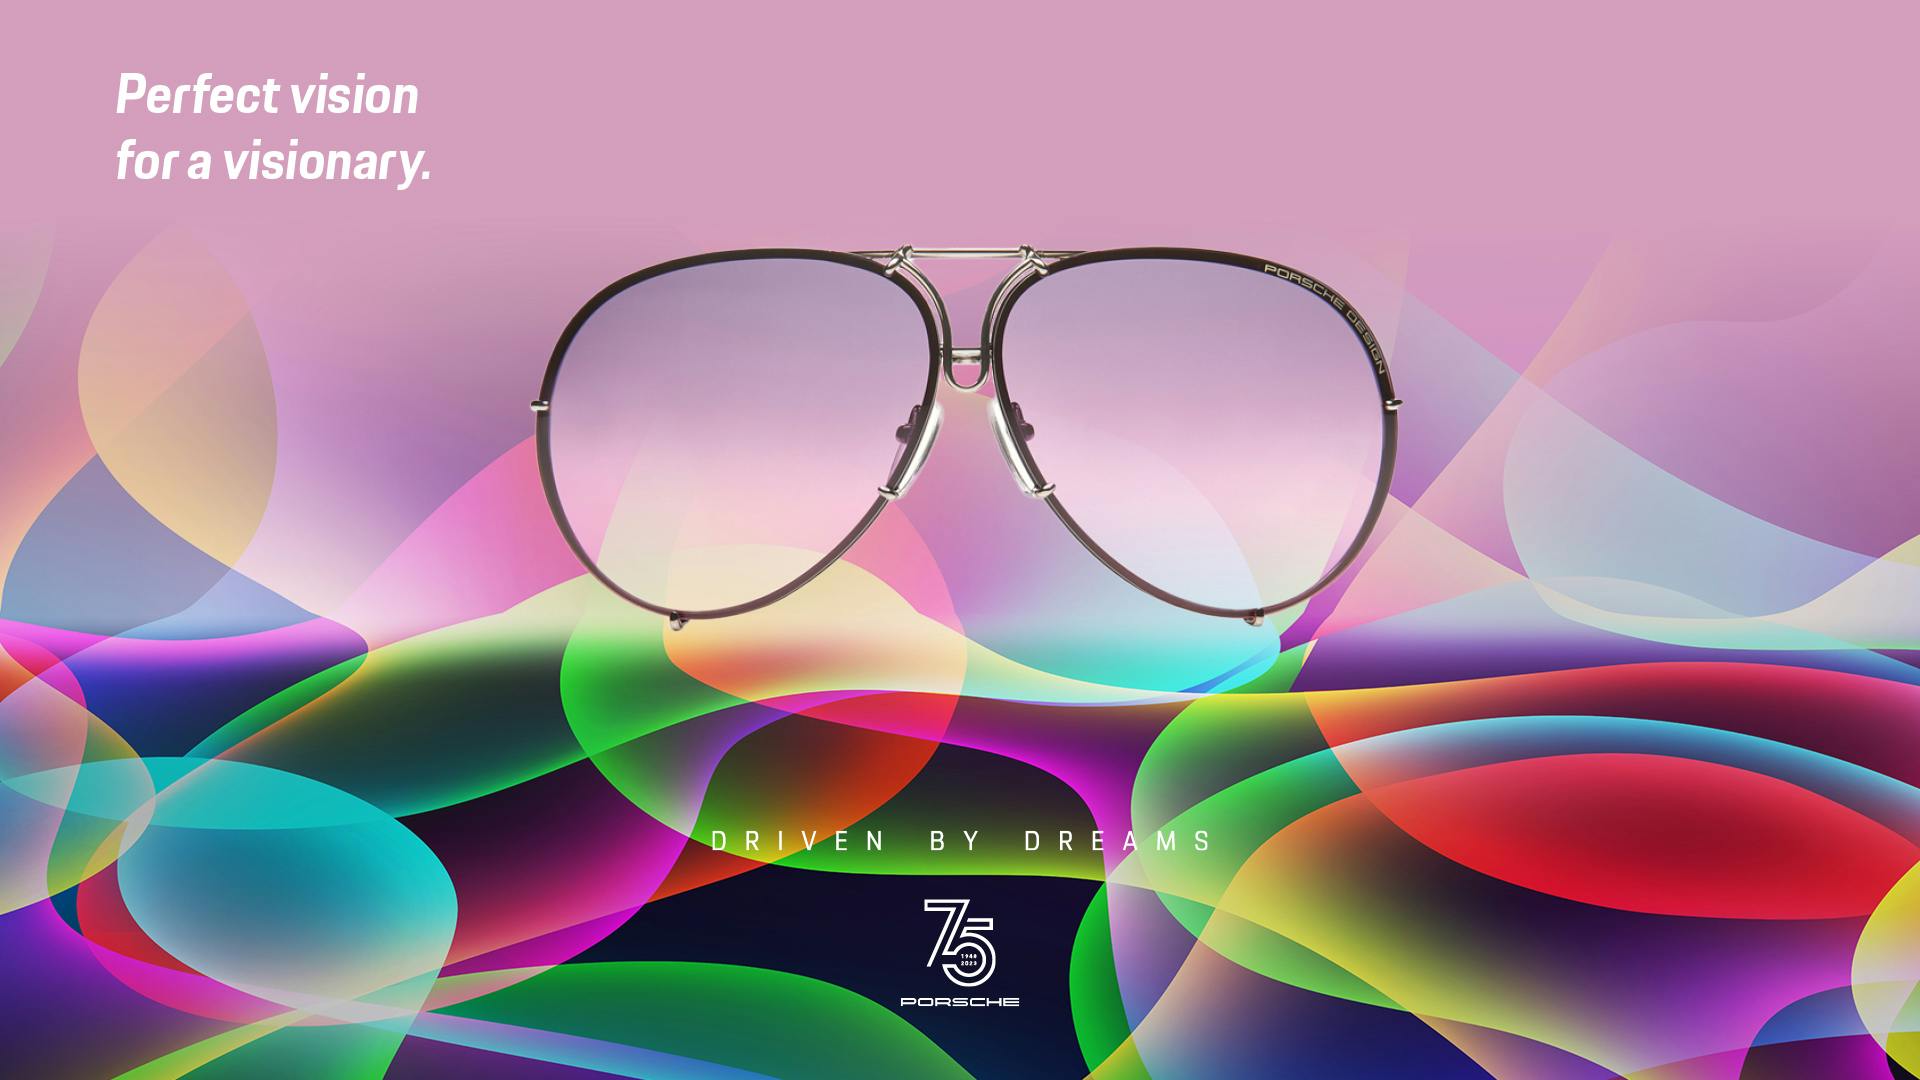 A pair of Porsche sunglasses is depicted on a colorful background. Decorated with the inscription "Perfect vision for visionary" in the top left corner. In the foreground of the picture is the white lettering "Driven by Dreams" with the number 75, which stands for 75 years of Porsche sports cars.